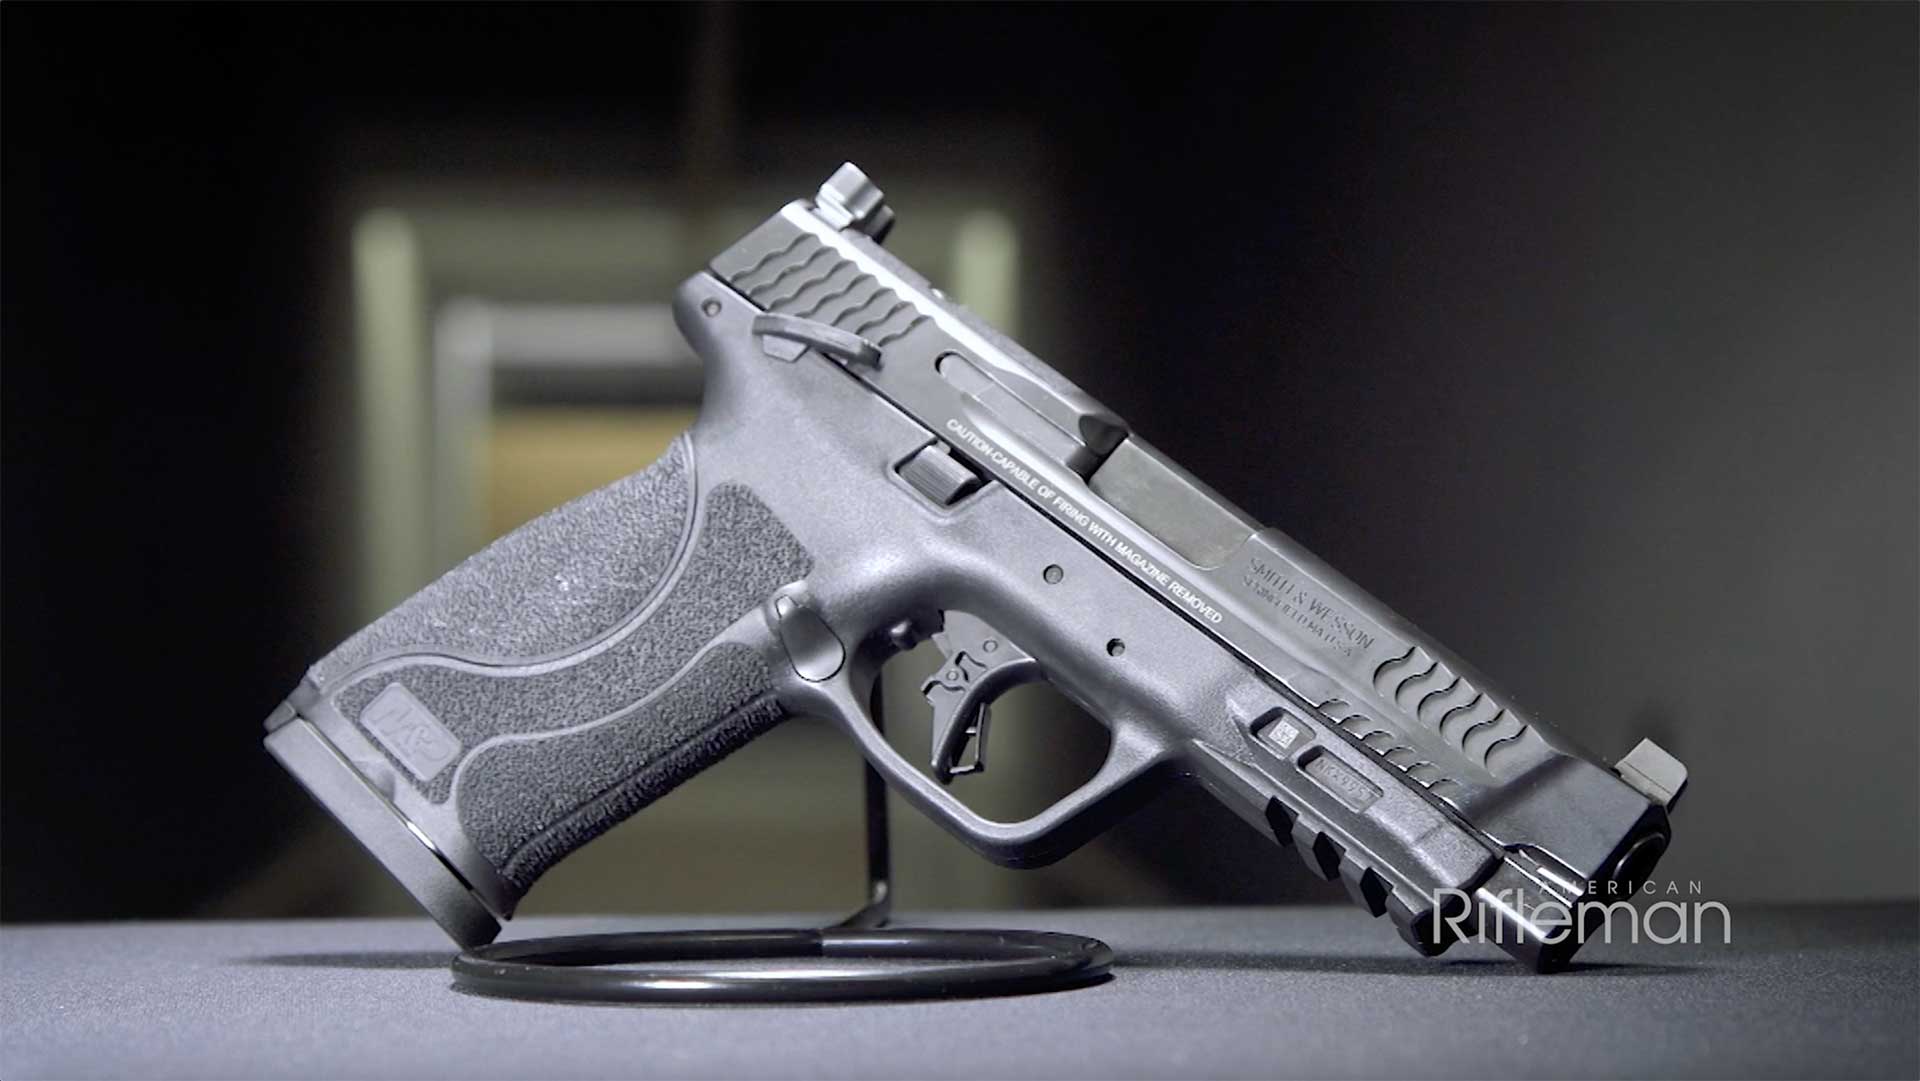 Right side of the Smith & Wesson M&P 10mm M2.0 pistol.